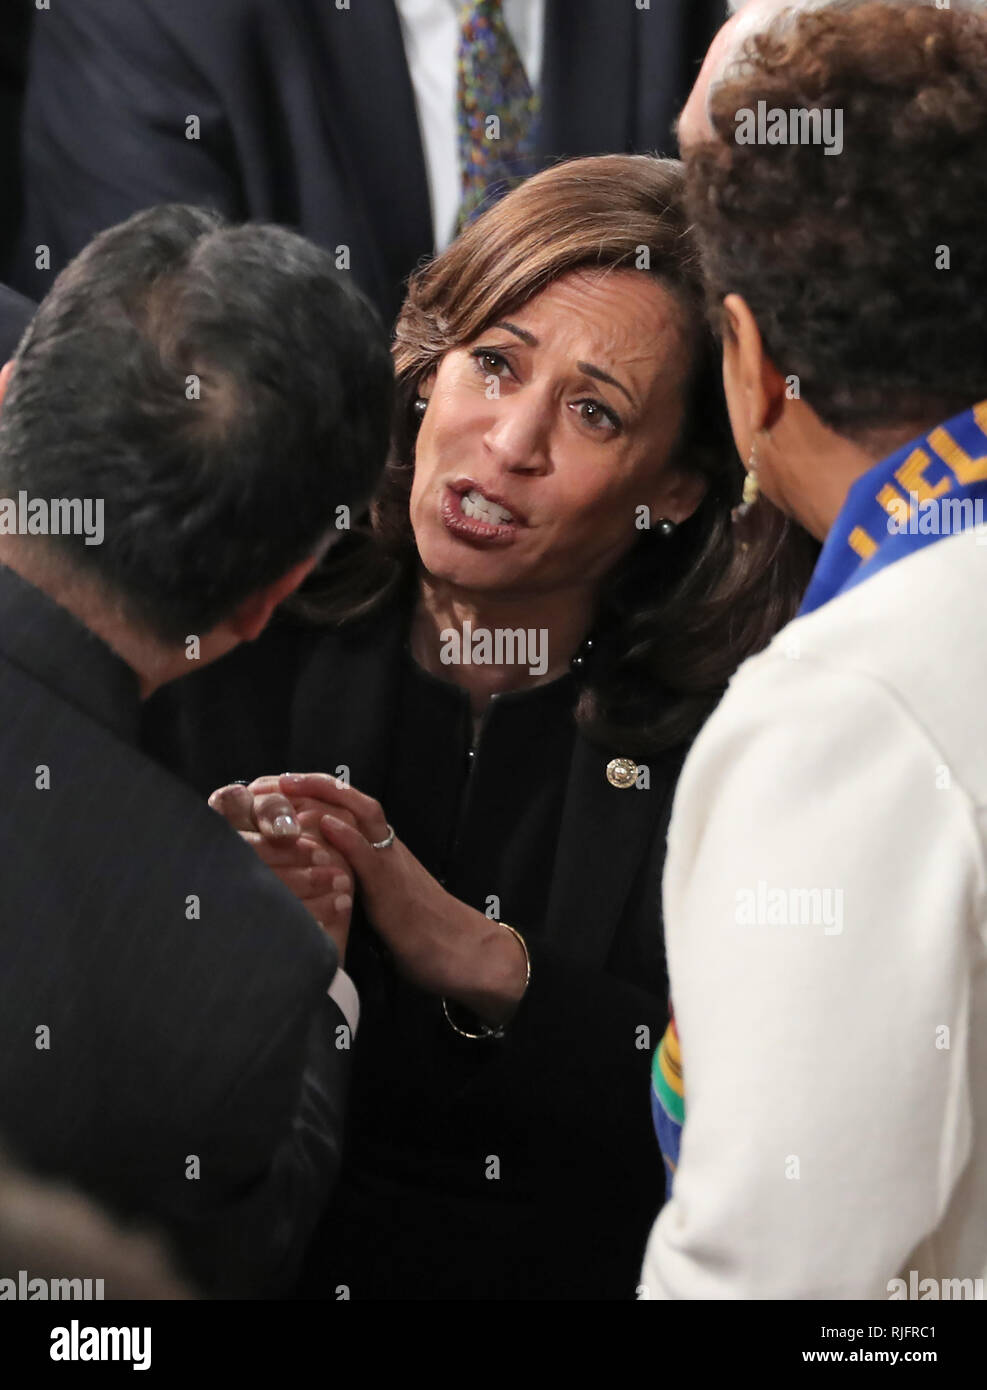 Washington, United States Of America. 05th Feb, 2019. United States Senator Kamala Harris (Democrat of California) in discussion with her colleagues prior to US President Donald J. Trump delivering his second annual State of the Union Address to a joint session of the US Congress in the US Capitol in Washington, DC on Tuesday, February 5, 2019. Credit: Alex Edelman/CNP | usage worldwide Credit: dpa/Alamy Live News Stock Photo